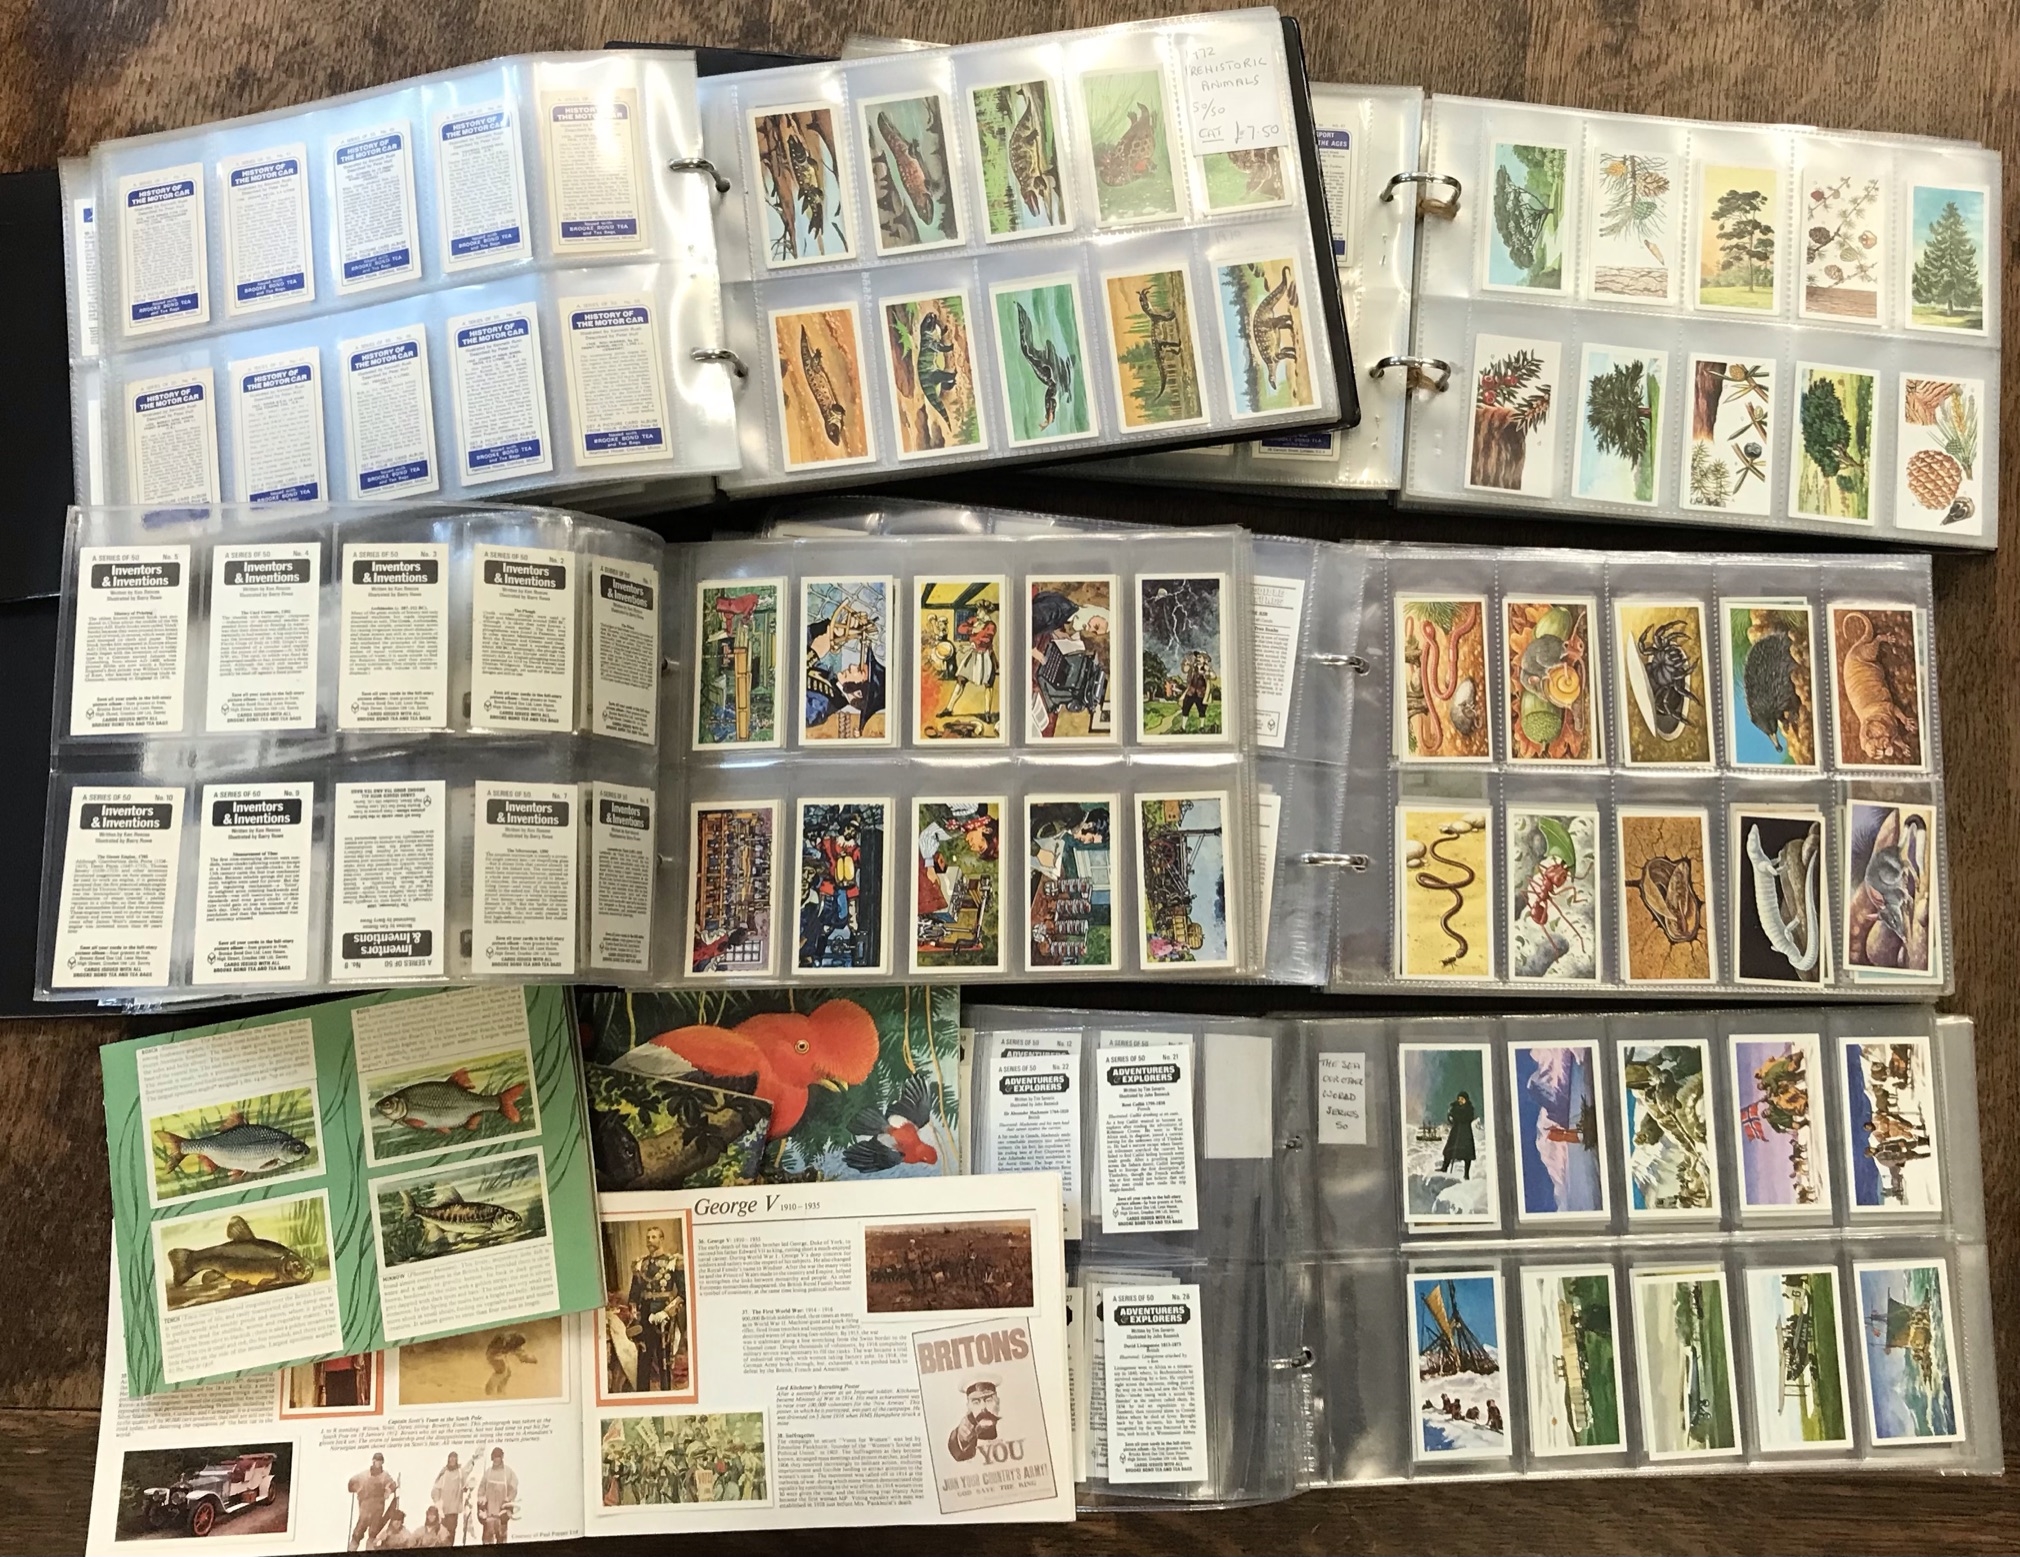 Brooke Bond Tea, 68 Full Sets, varied subjects, 4 stuck in albums, VGC, heavy item buyer collects